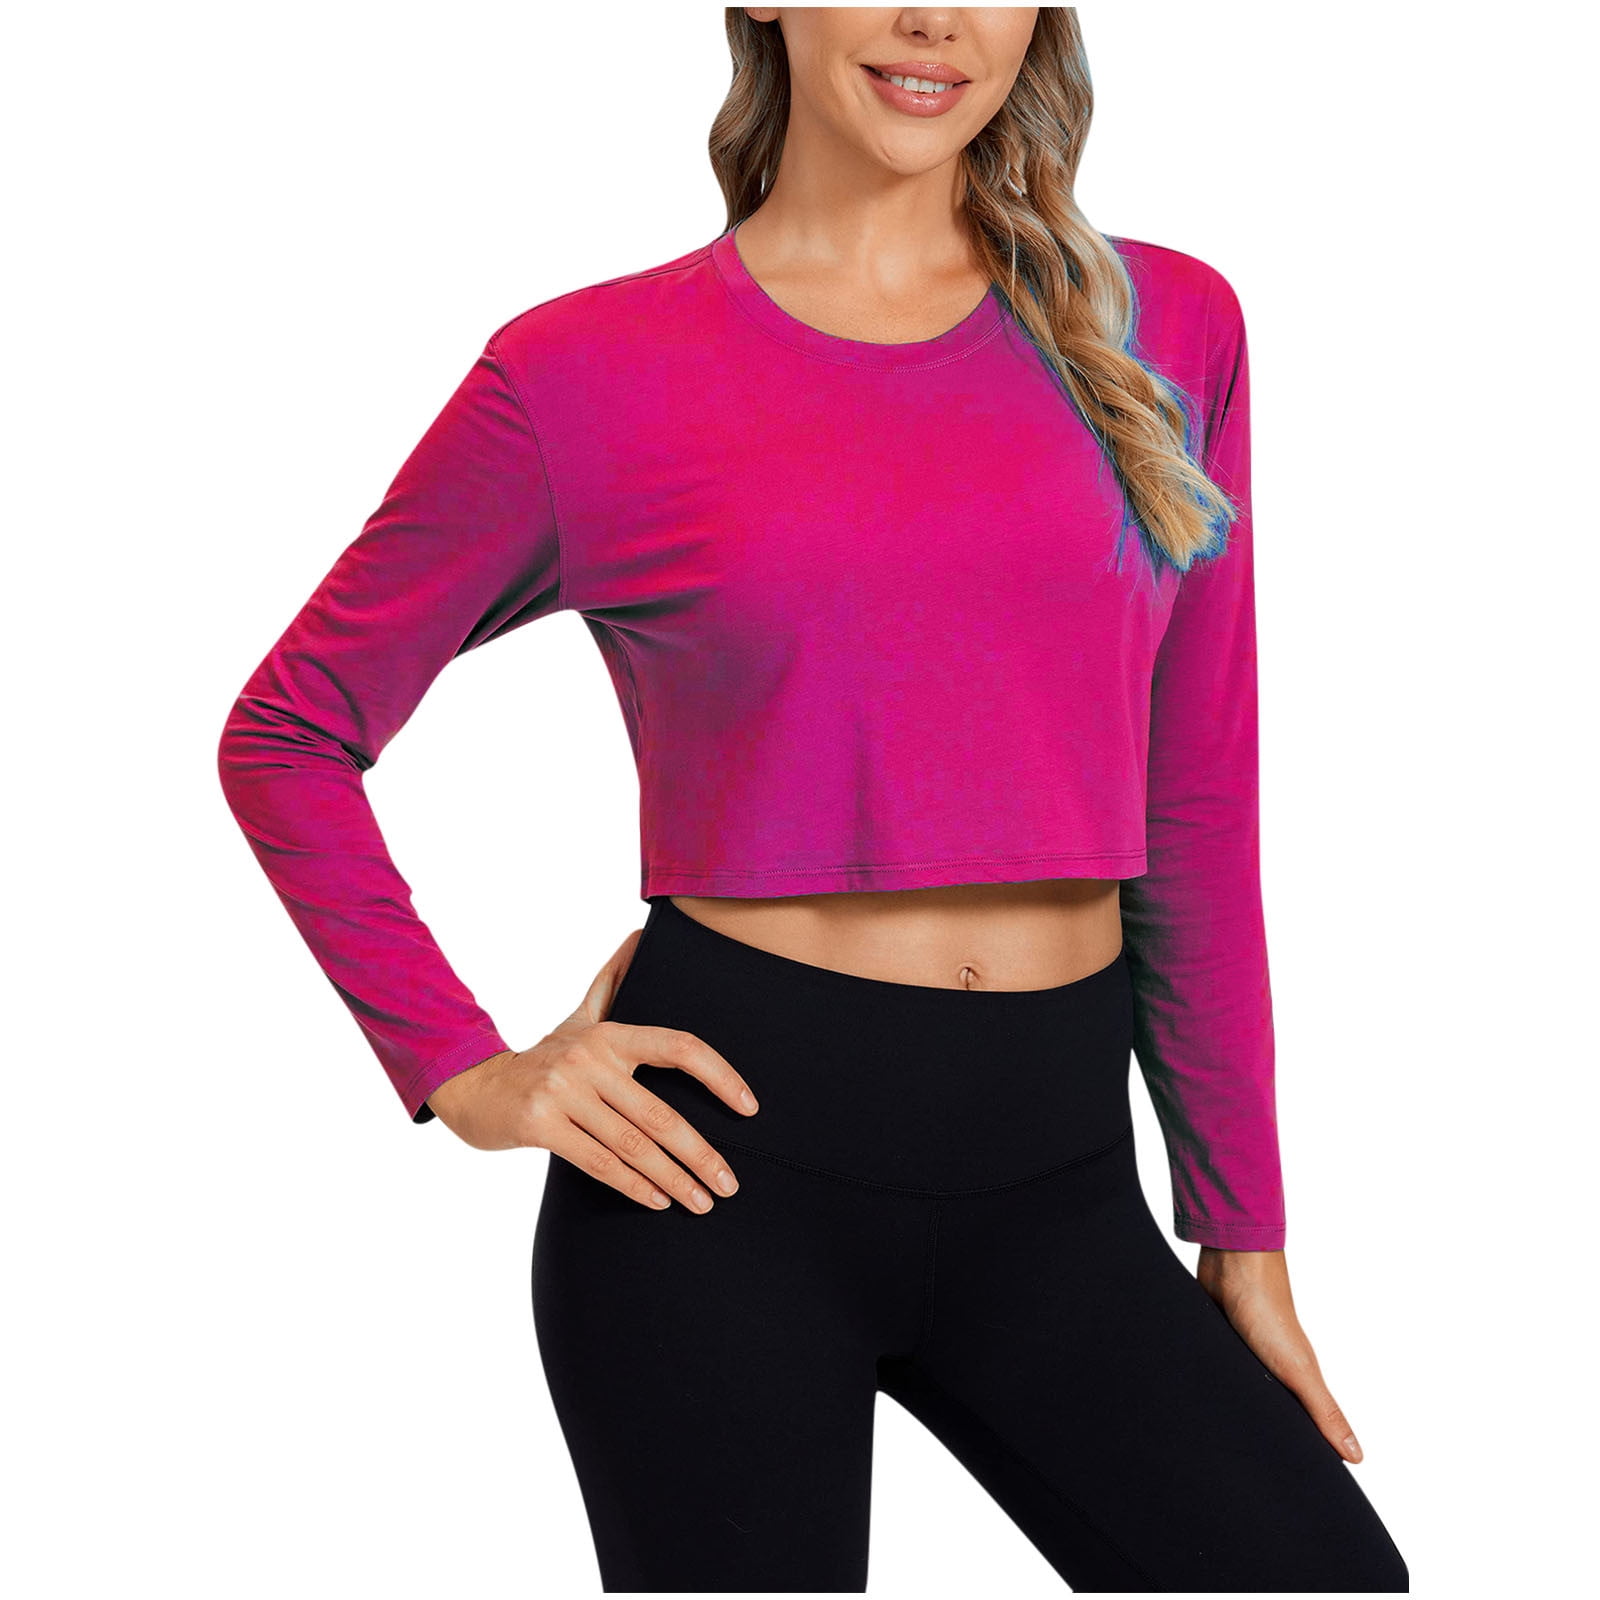 XFLWAM Cotton Long Sleeve Shirts for Women Workout Crop Tops Loose Cropped  T-Shirts Athletic Gym Shirts Pink L